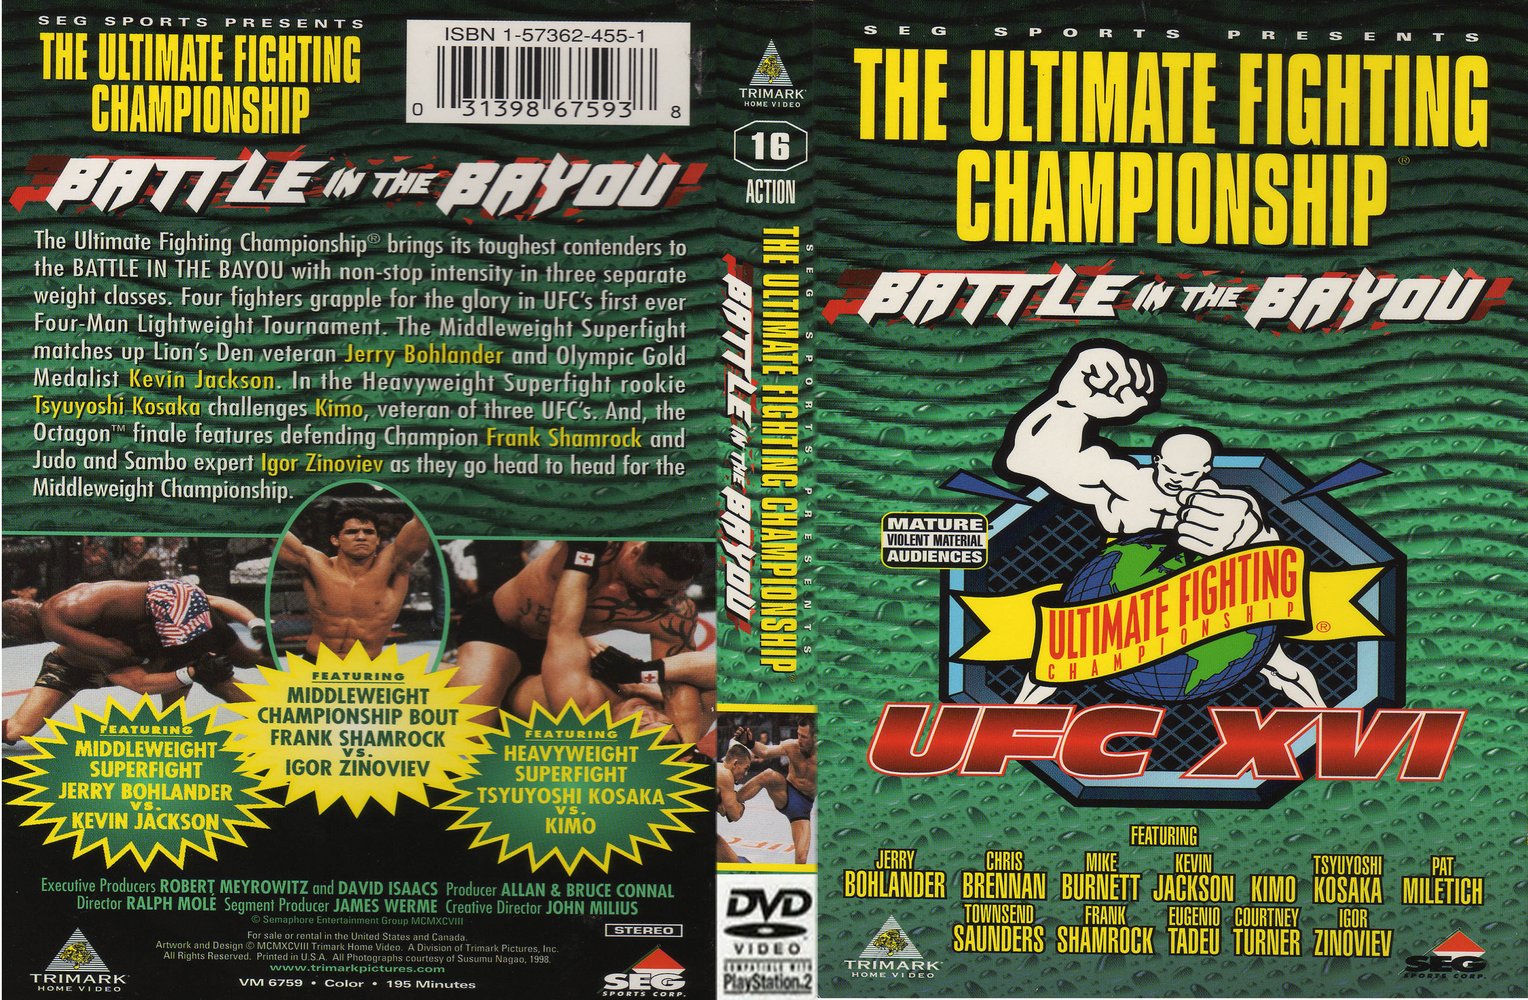 Jaquette DVD Ufc 16 Battle in the bayou